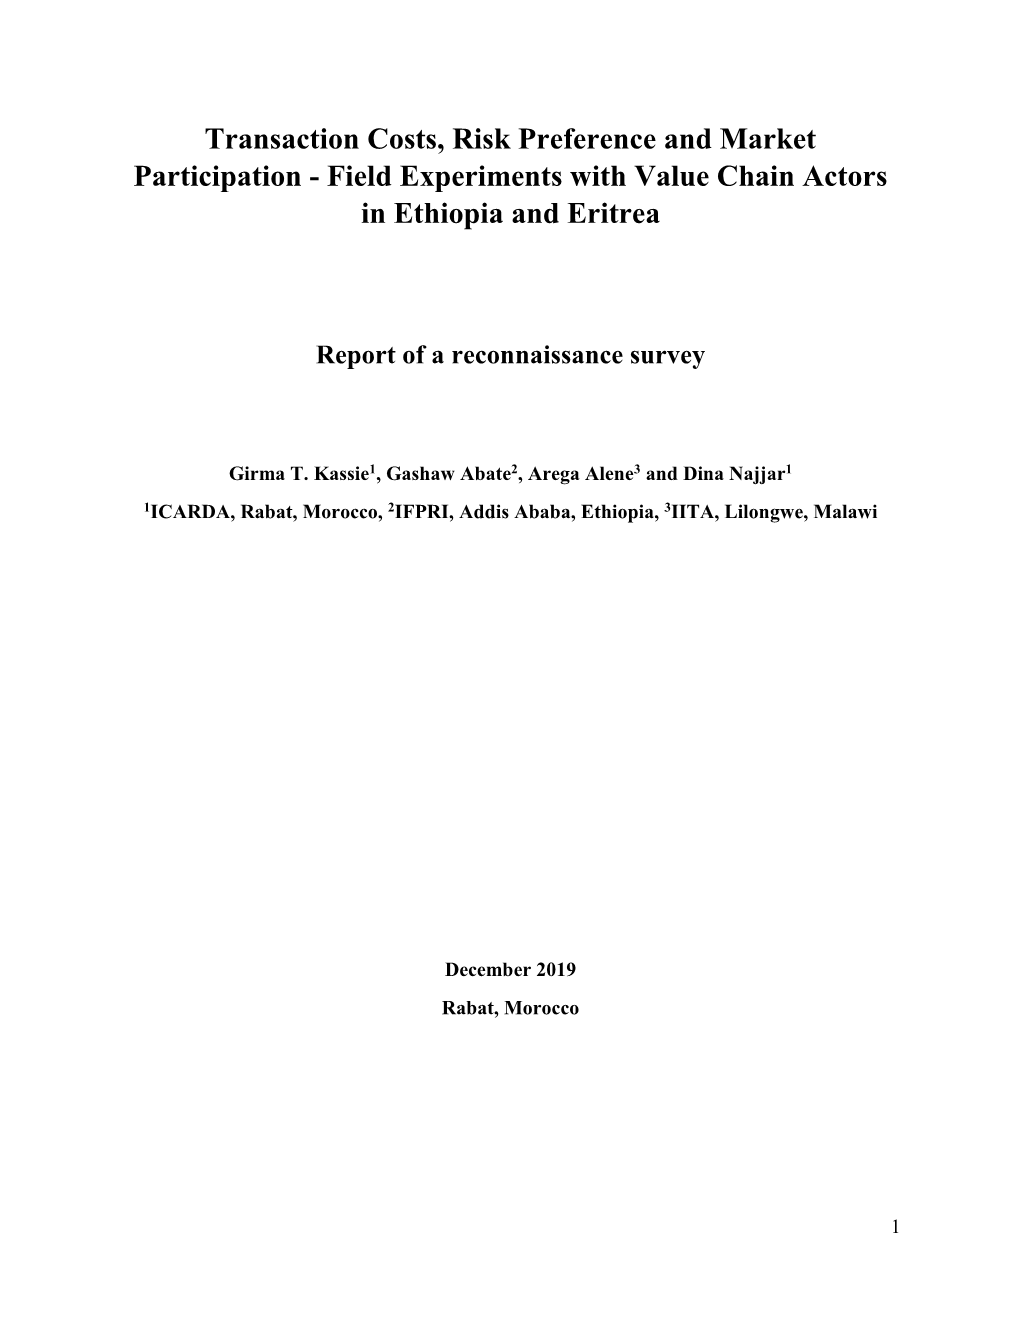 Field Experiments with Value Chain Actors in Ethiopia and Eritrea